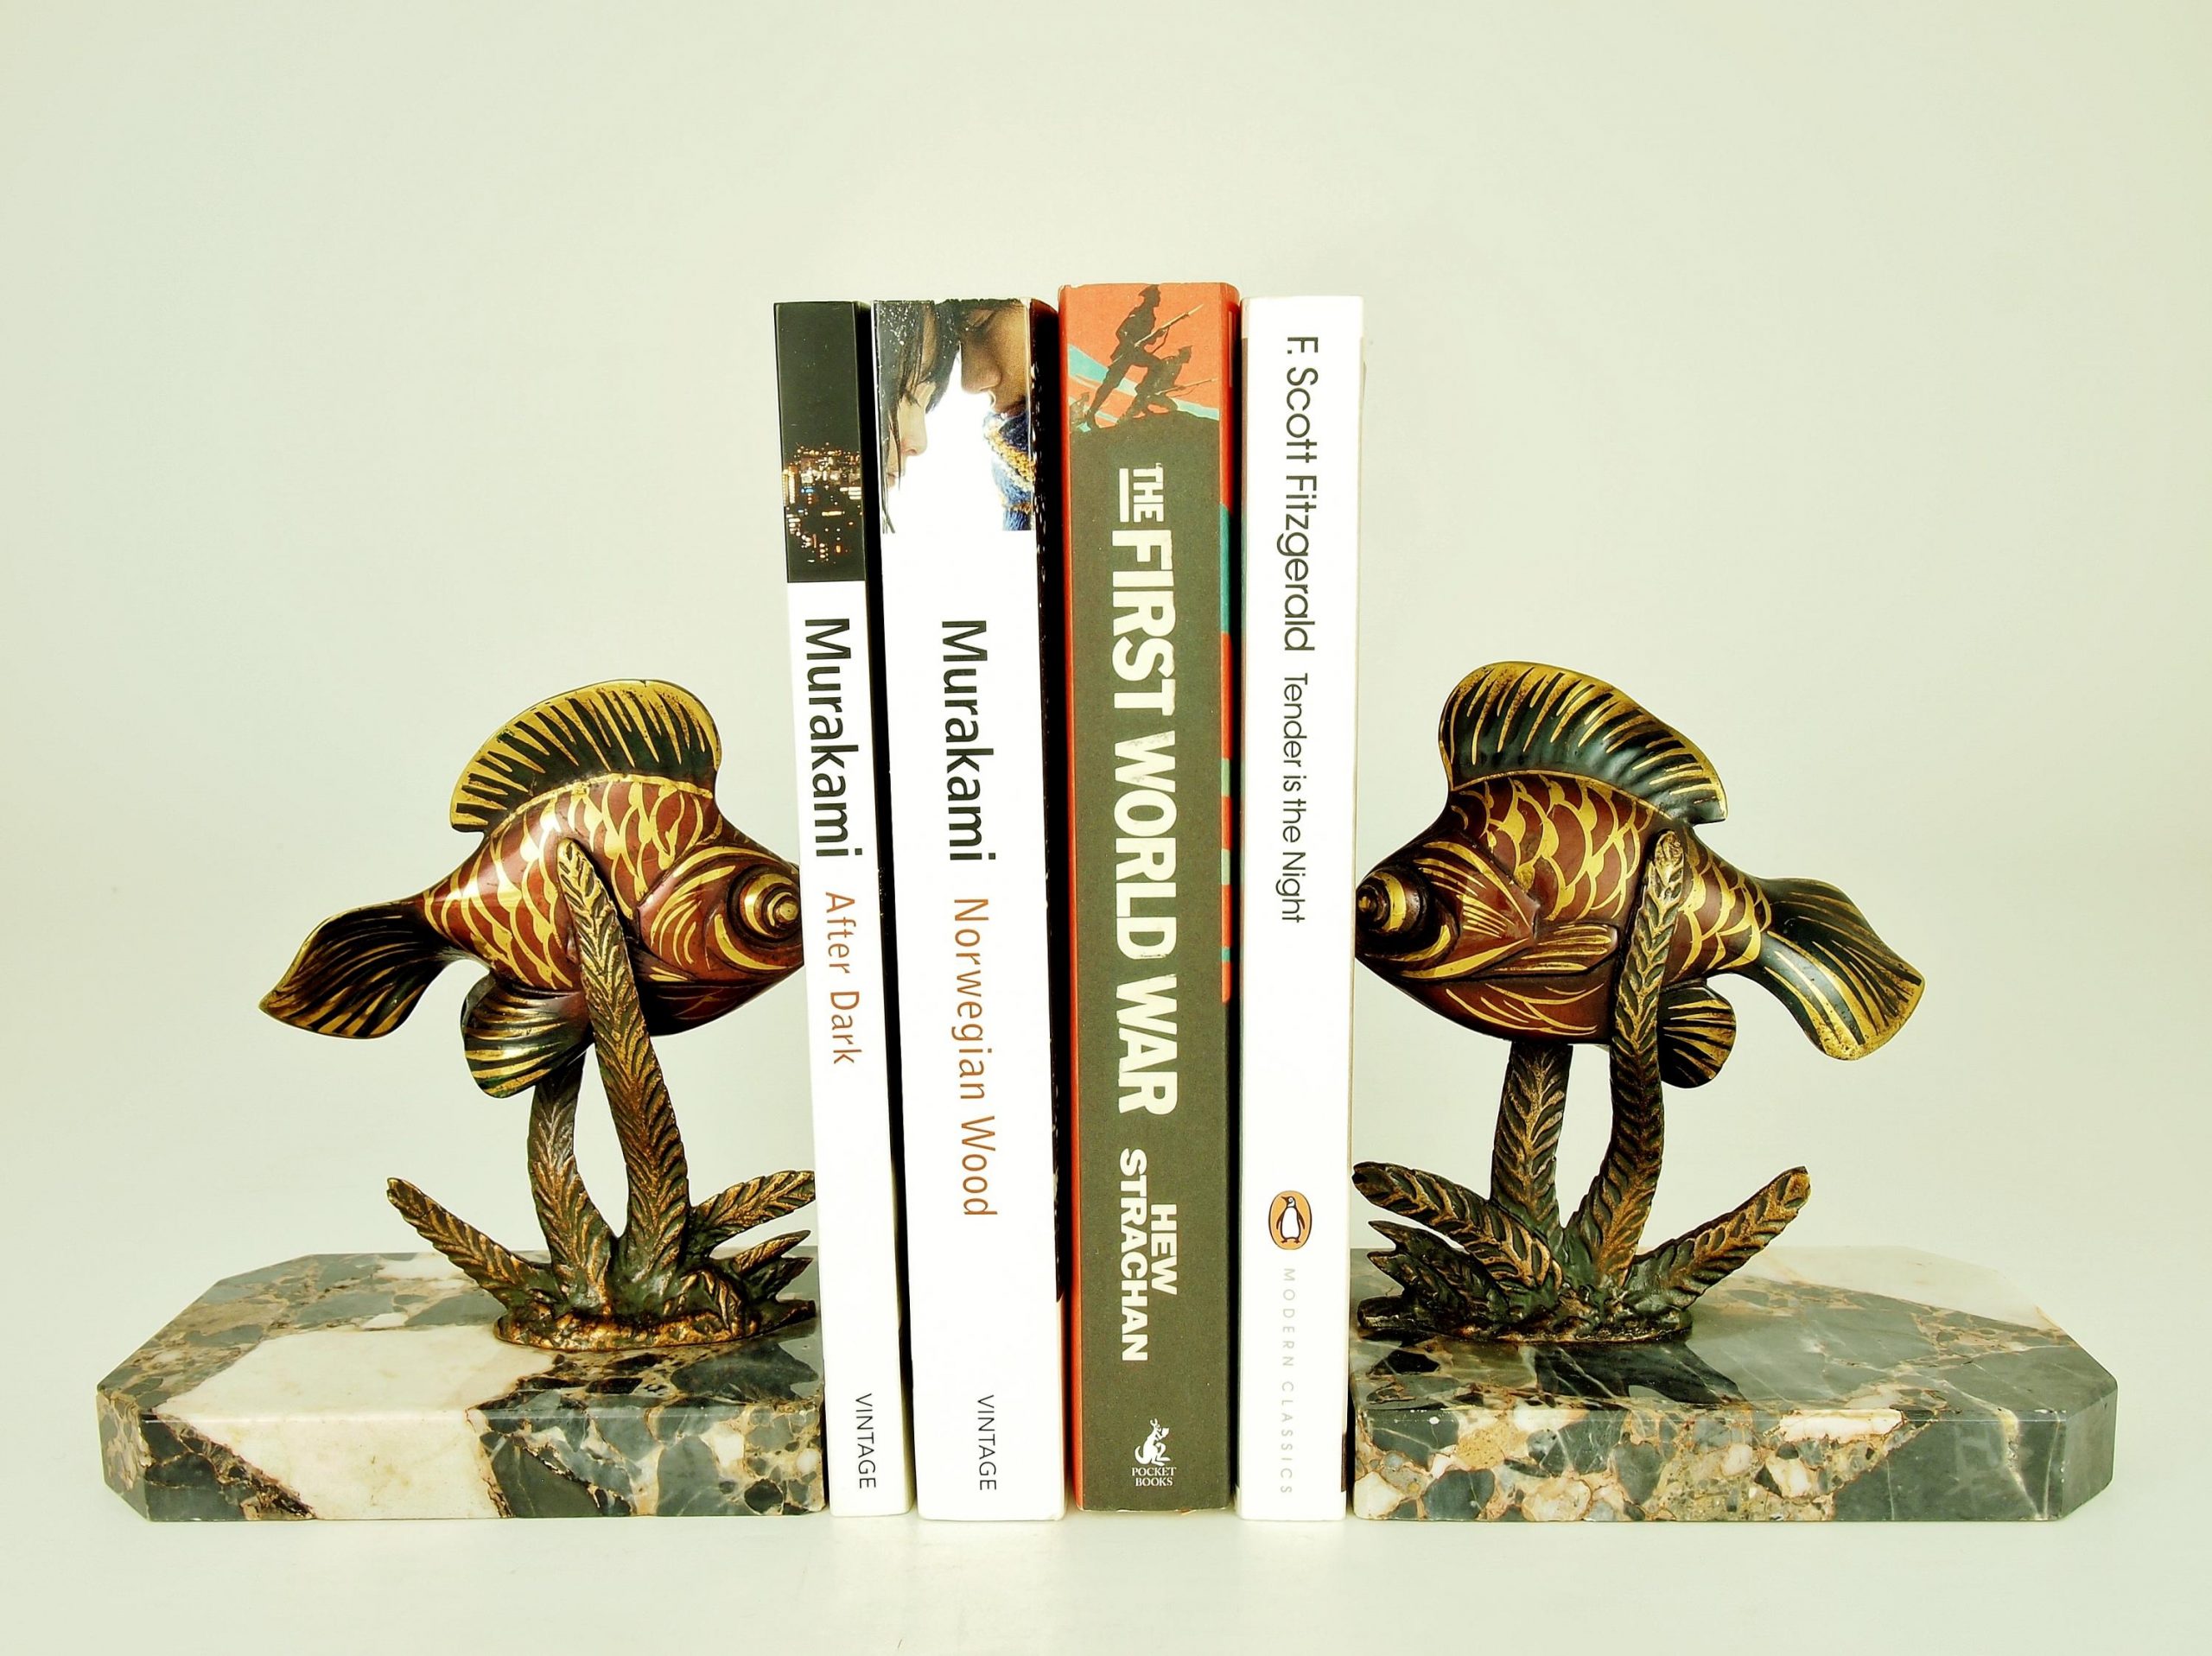 https://www.nouveaudecoarts.com/wp-content/uploads/2020/09/fish-among-the-reeds-bookends3711-scaled.jpg